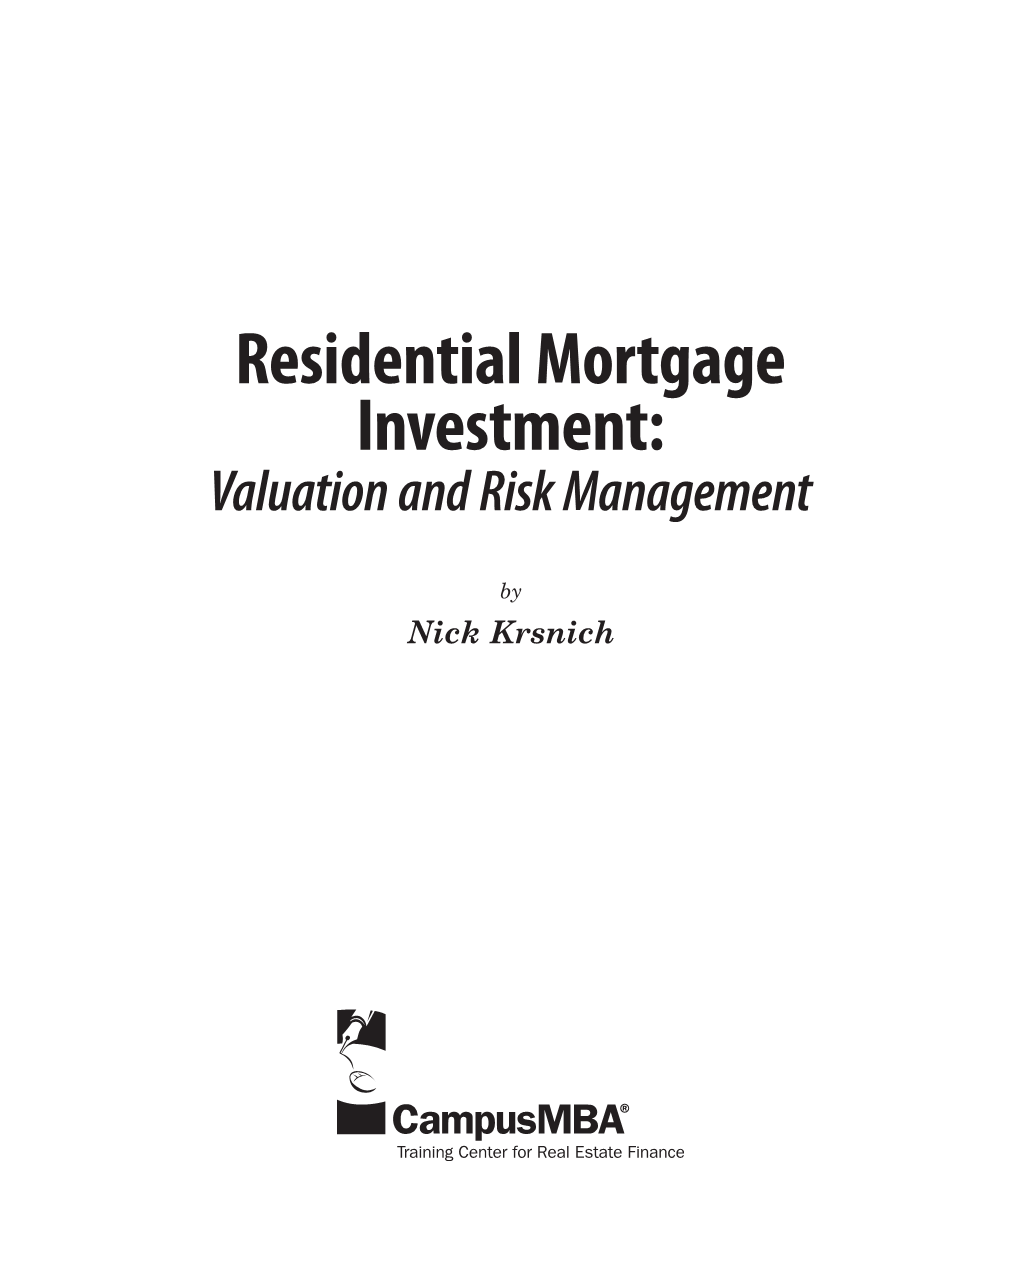 Residential Mortgage Investment: Valuation and Risk Management